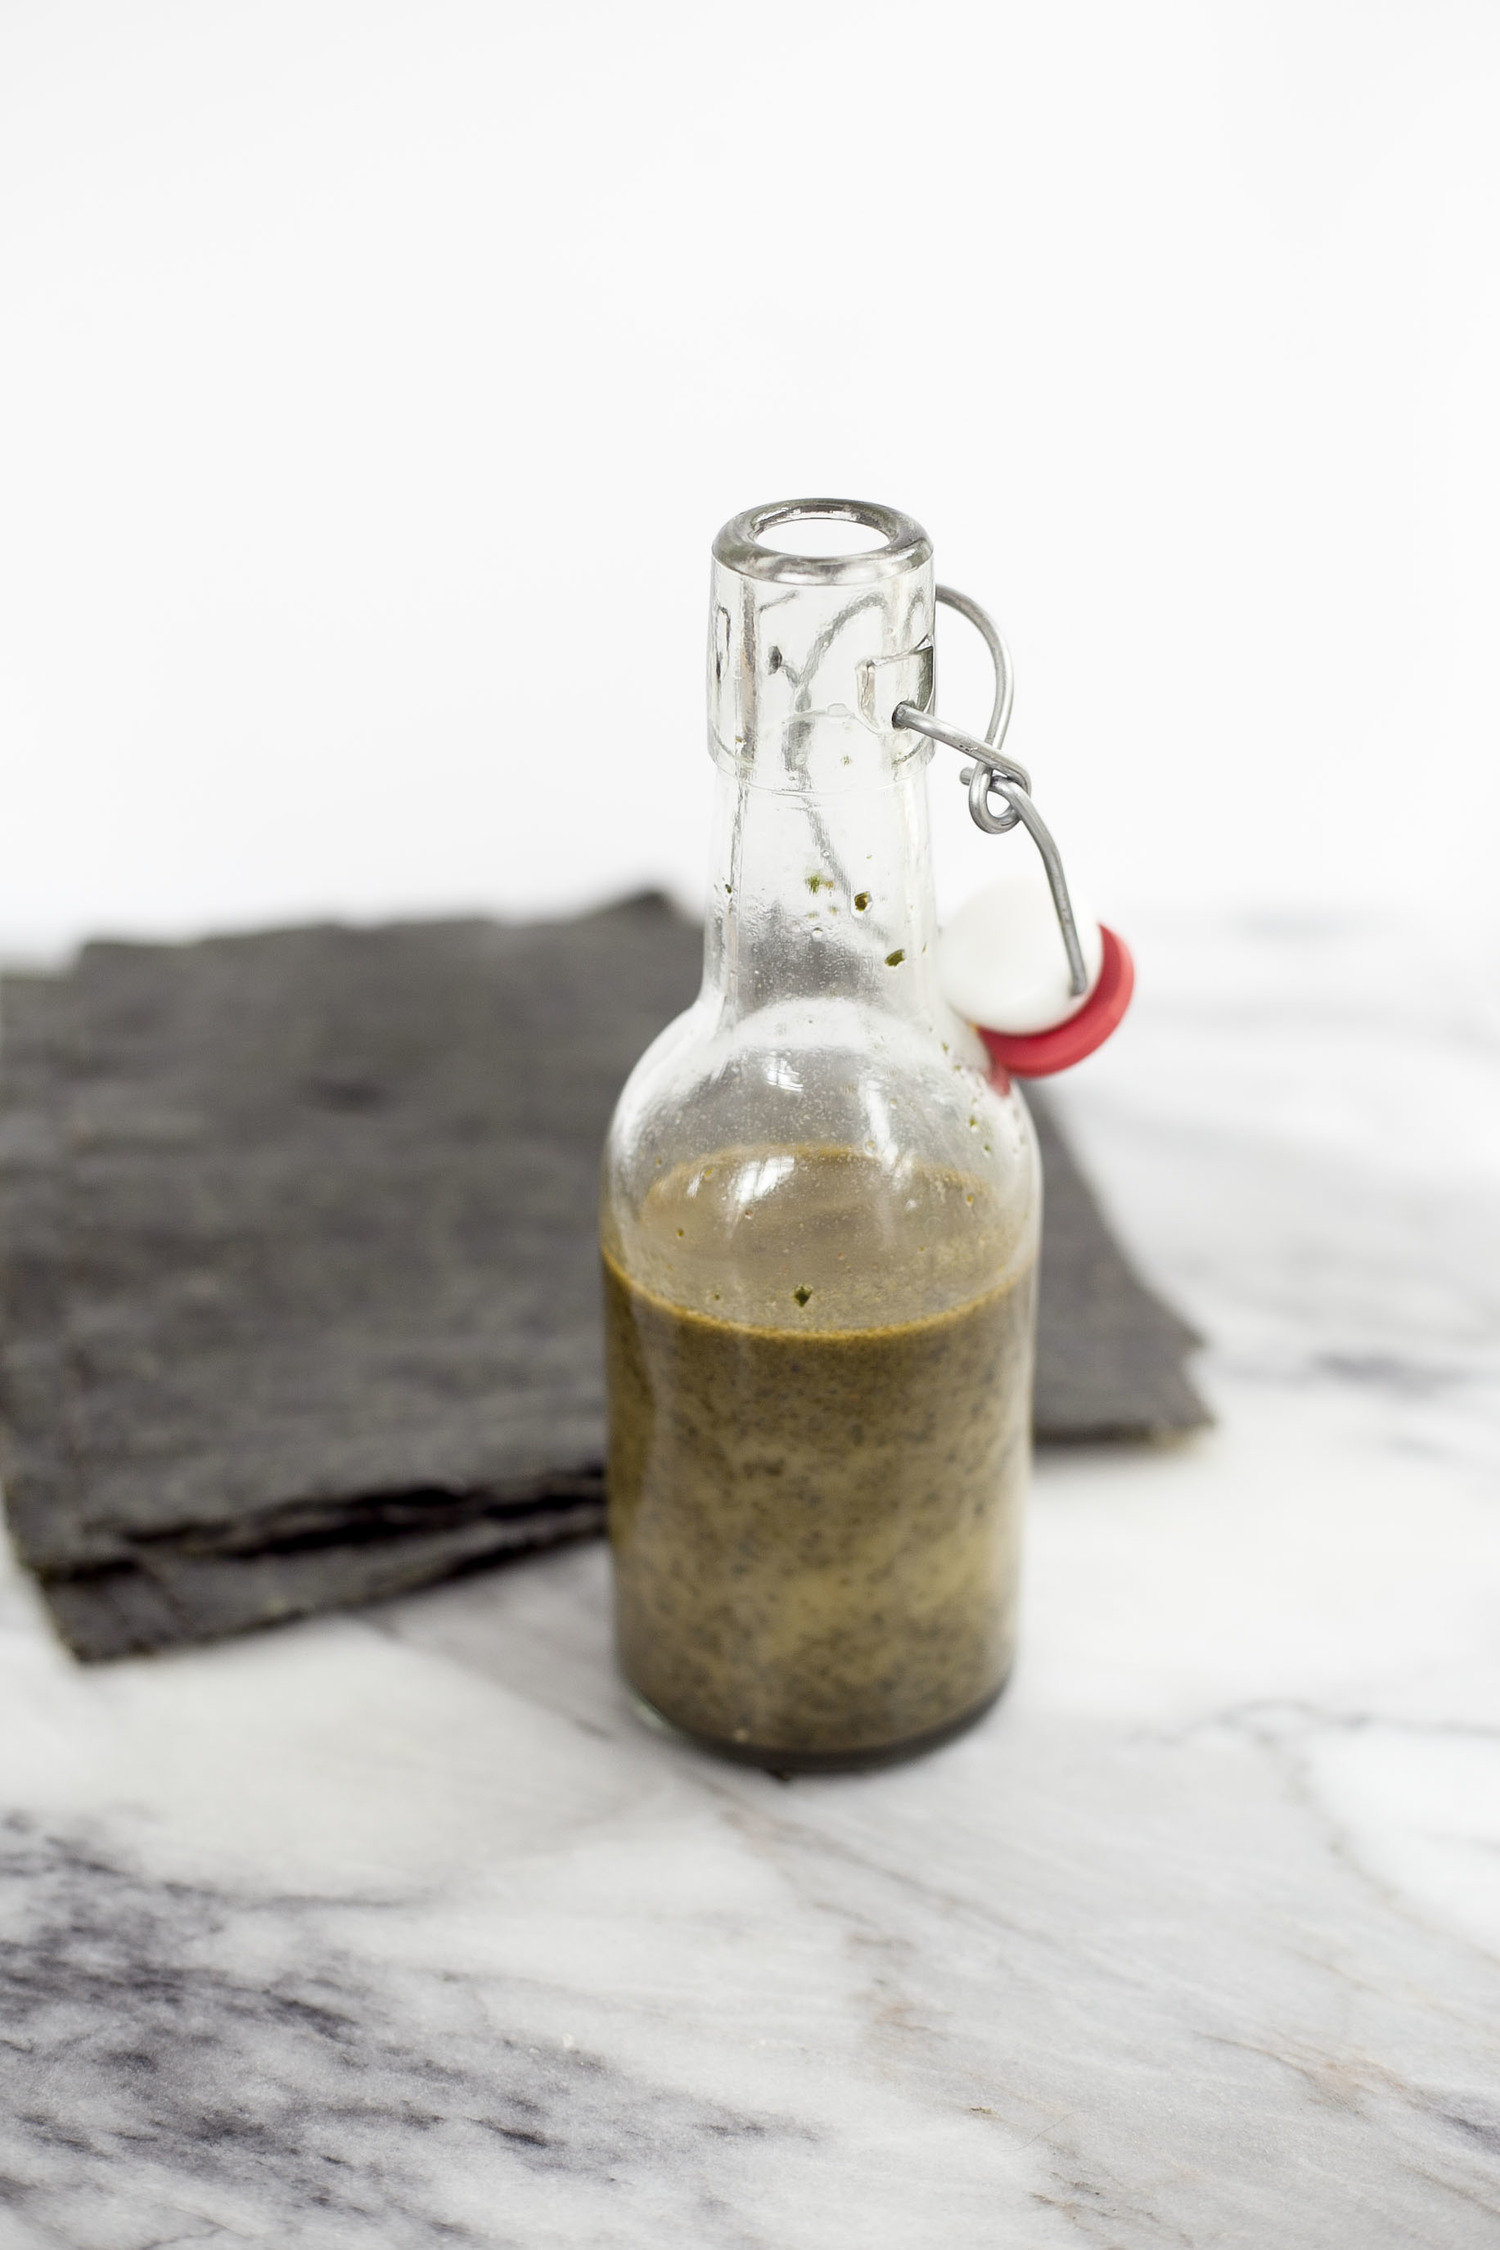 <strong>Get the <a href="http://healthfullyeverafter.co/food-nutrition-recipe-blog/2014/6/18/nori-salad-dressing" target="_blank">Nori Salad Dressing recipe</a>&nbsp;from Healthfully Ever After<br /><br /></strong>Nori is blended into this salad dressing.